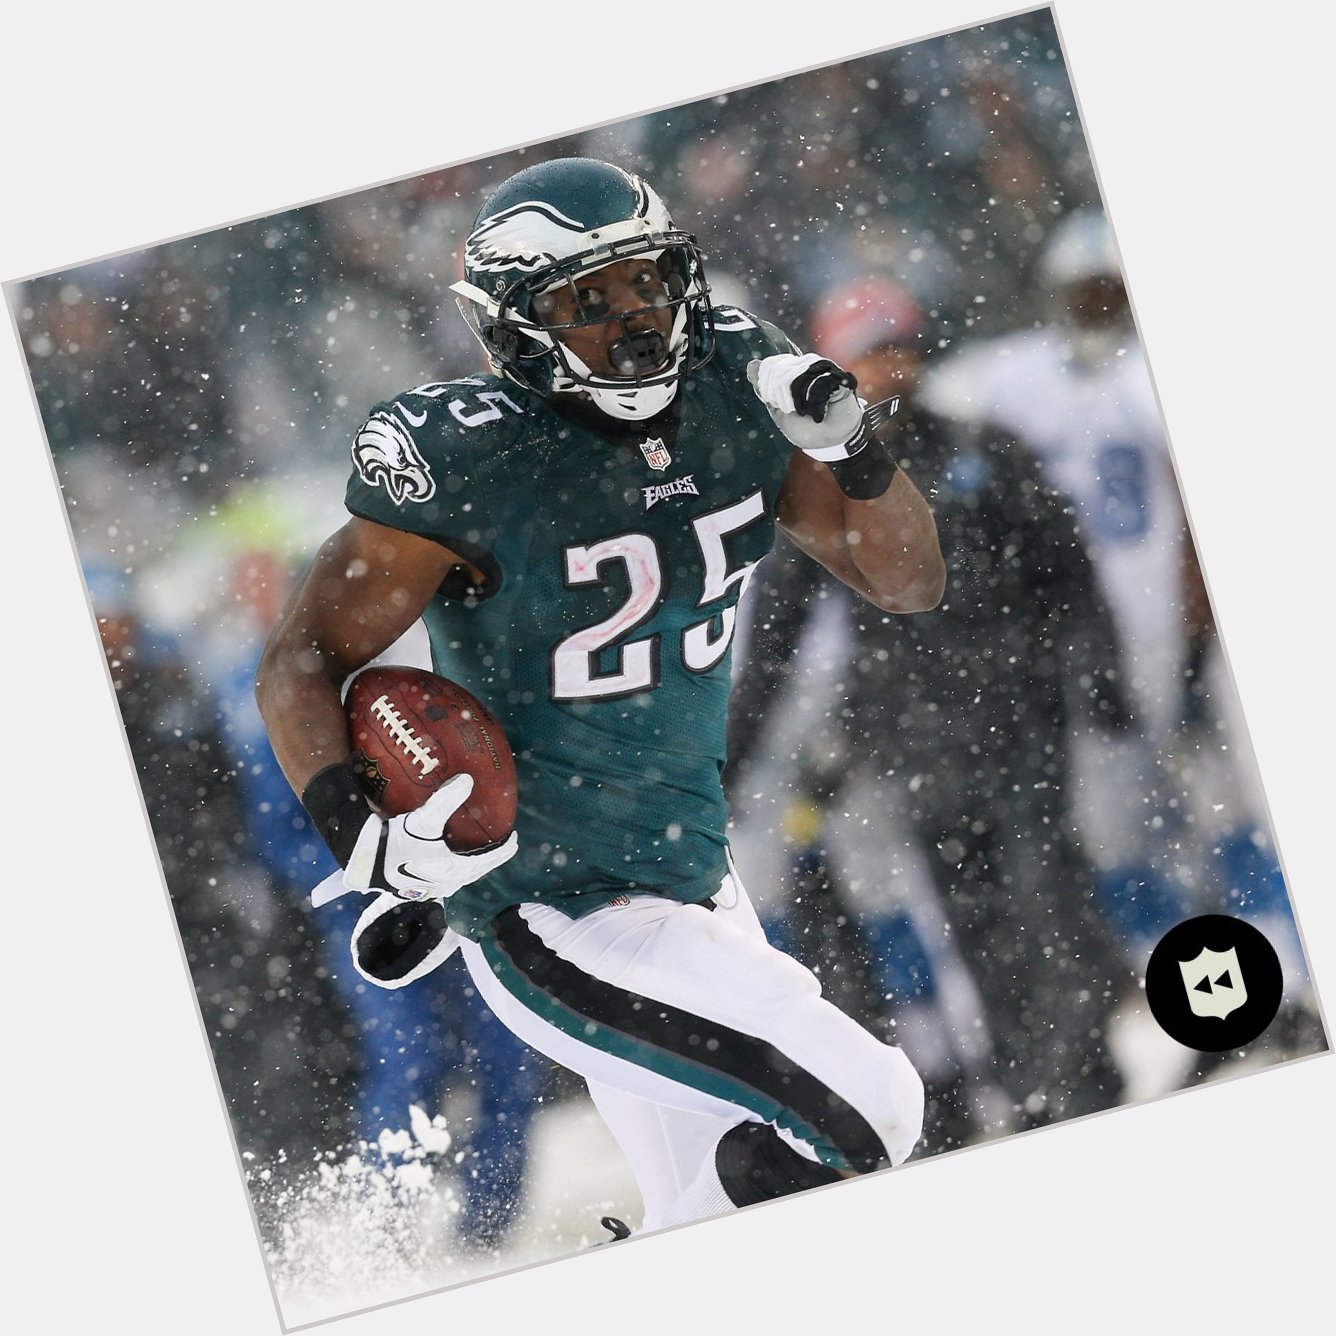  SHADY

Happy birthday to certified ankle snatcher LeSean McCoy! 